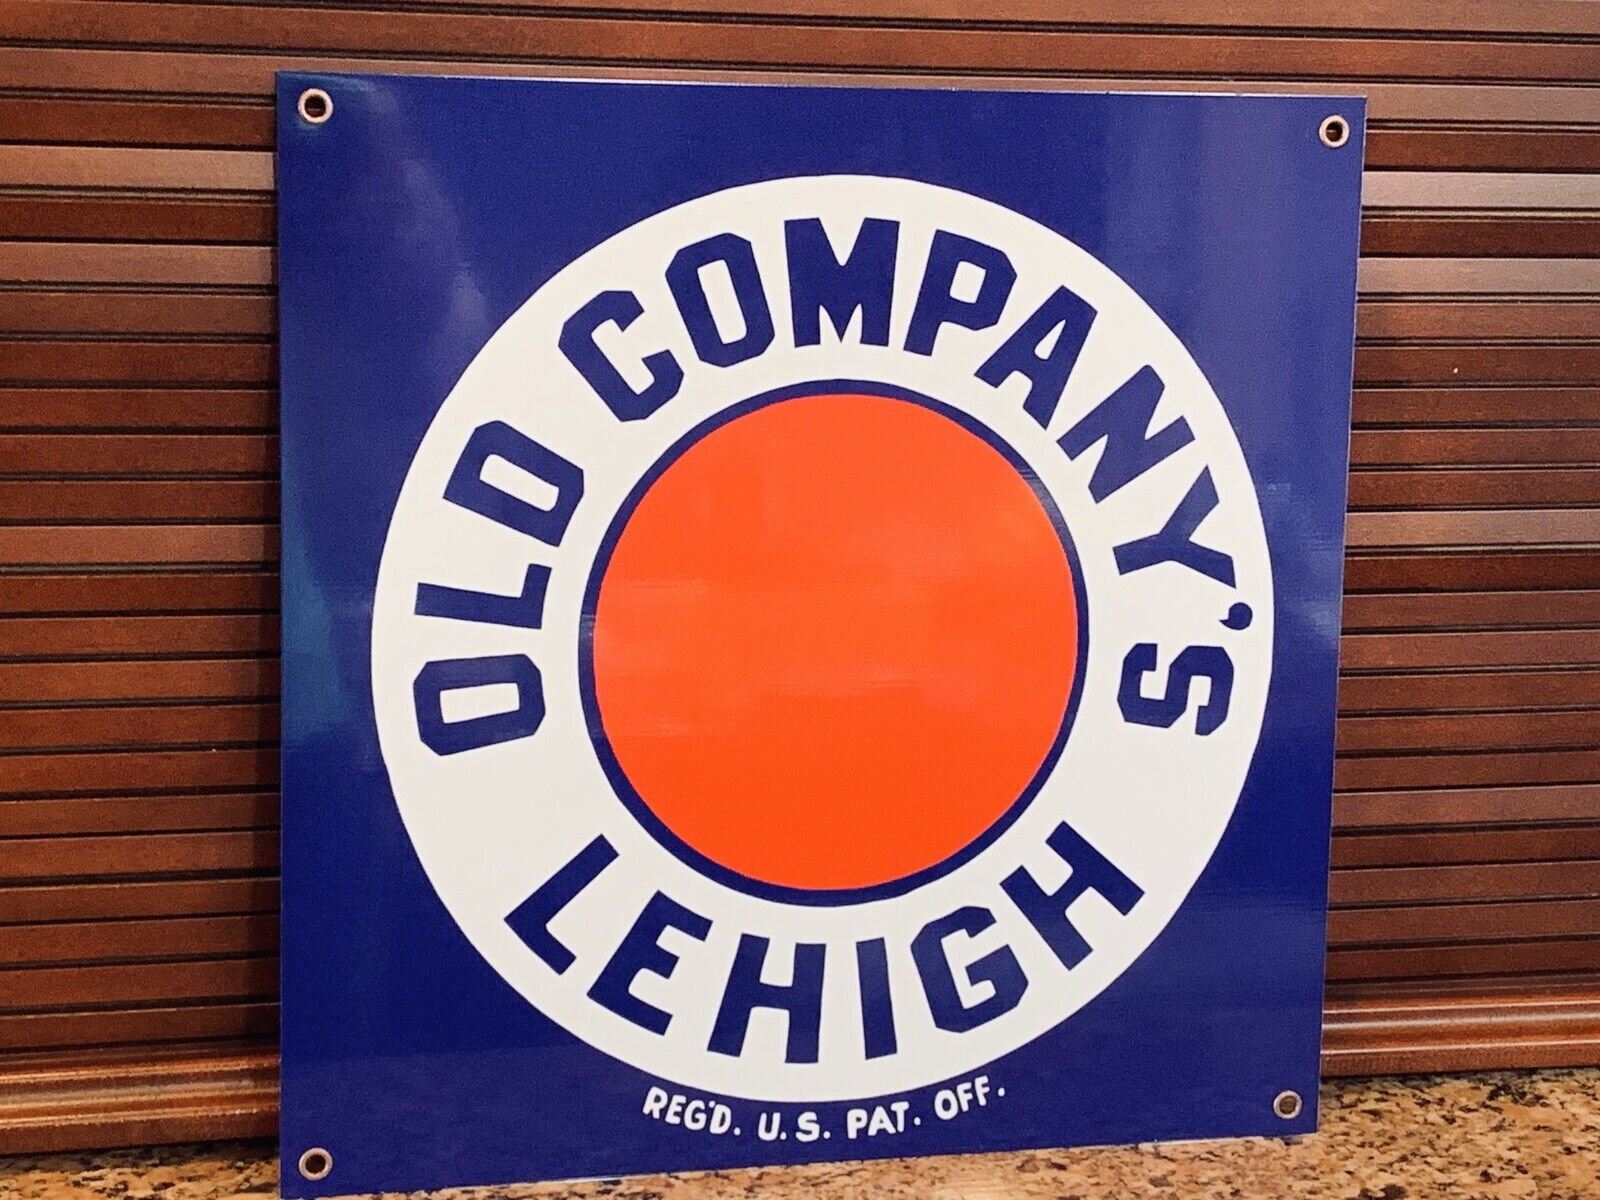 Old Company’s Lehigh Anthracite Coal vintage Style reproduction metal sign